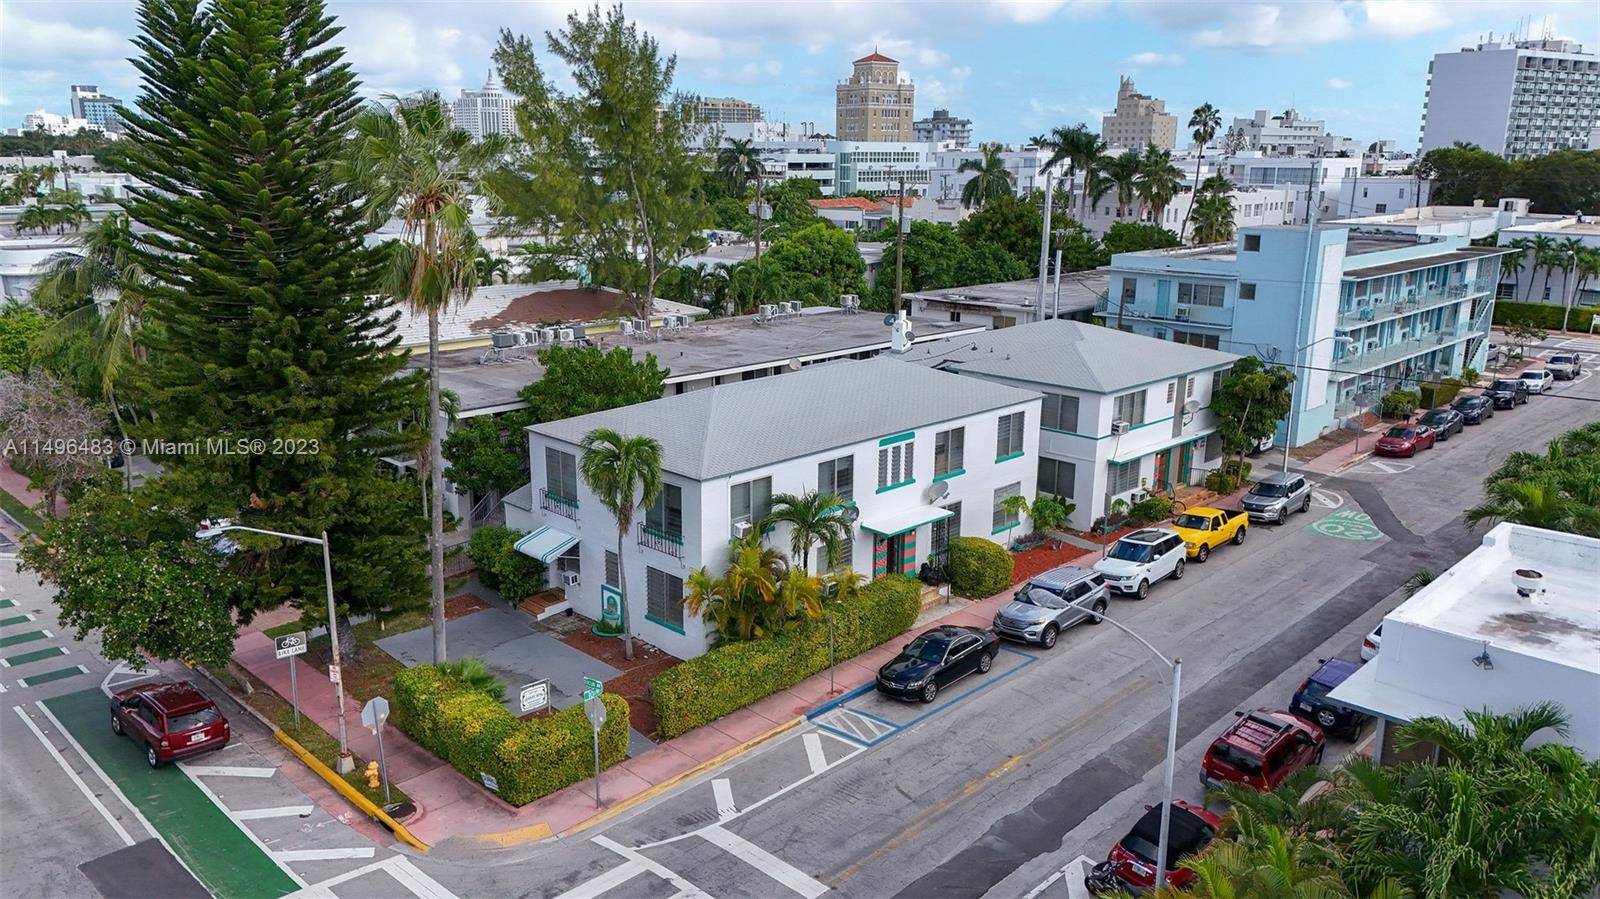 Investors welcome. Introducing Jennay Apartments, located on the corner of 10th and Euclid, just few blocks away from South Beach.